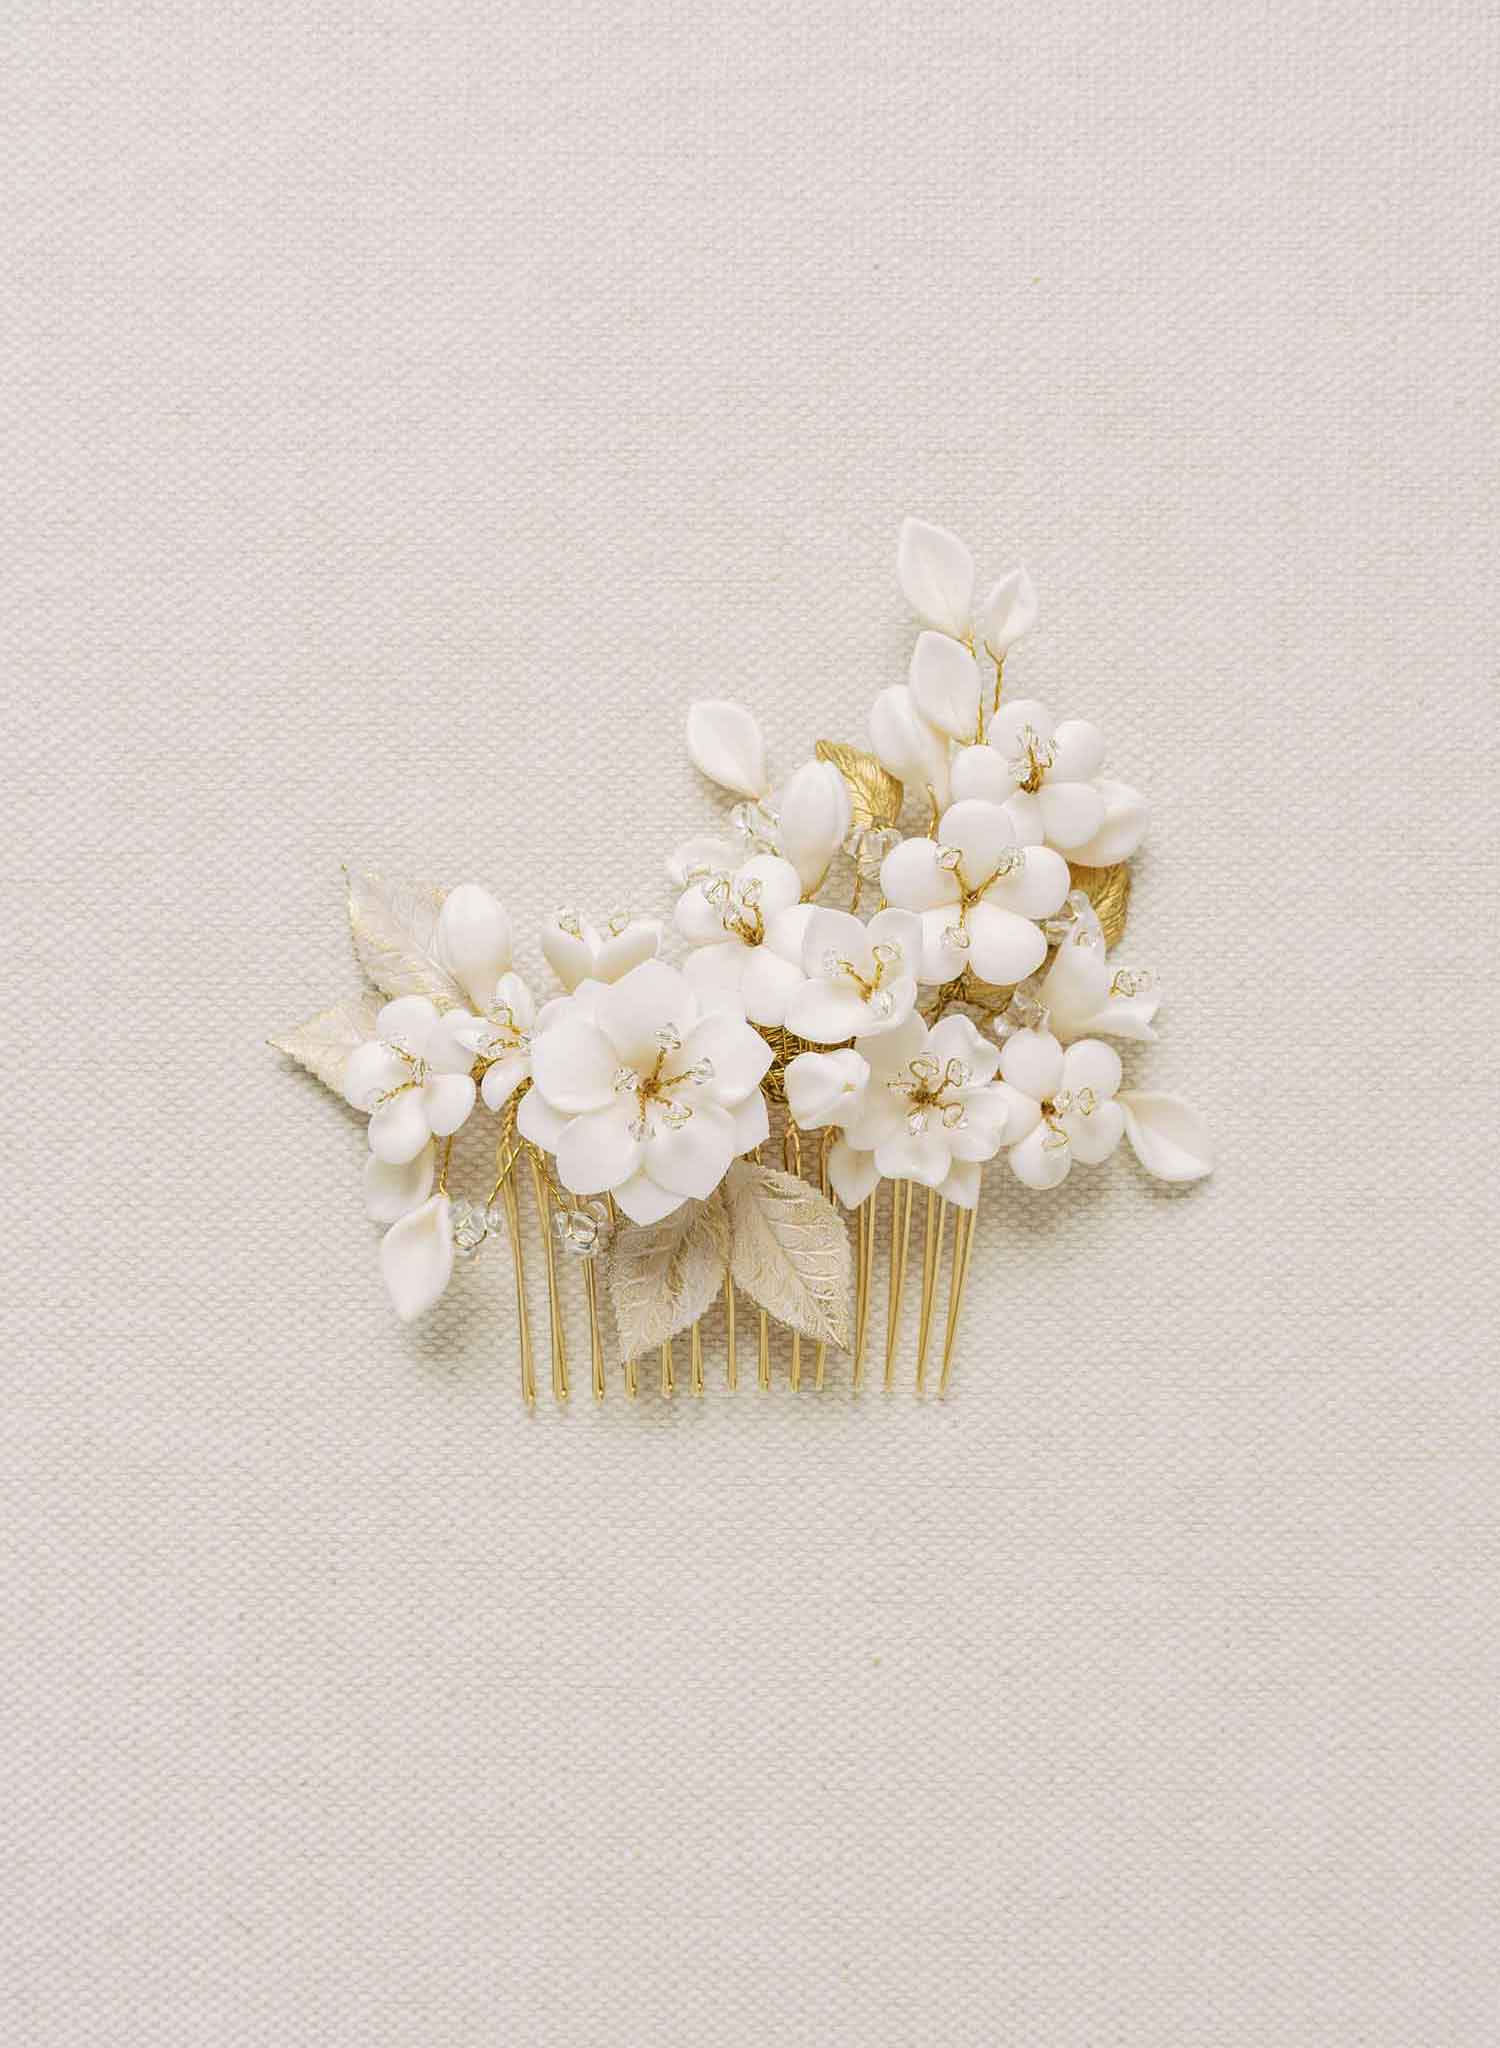 Twigs & Honey Bridal Handmade Flower Hair Pins - Hand Sculpted Simple Blossom Hair Pin Set of 5 - Style #2153